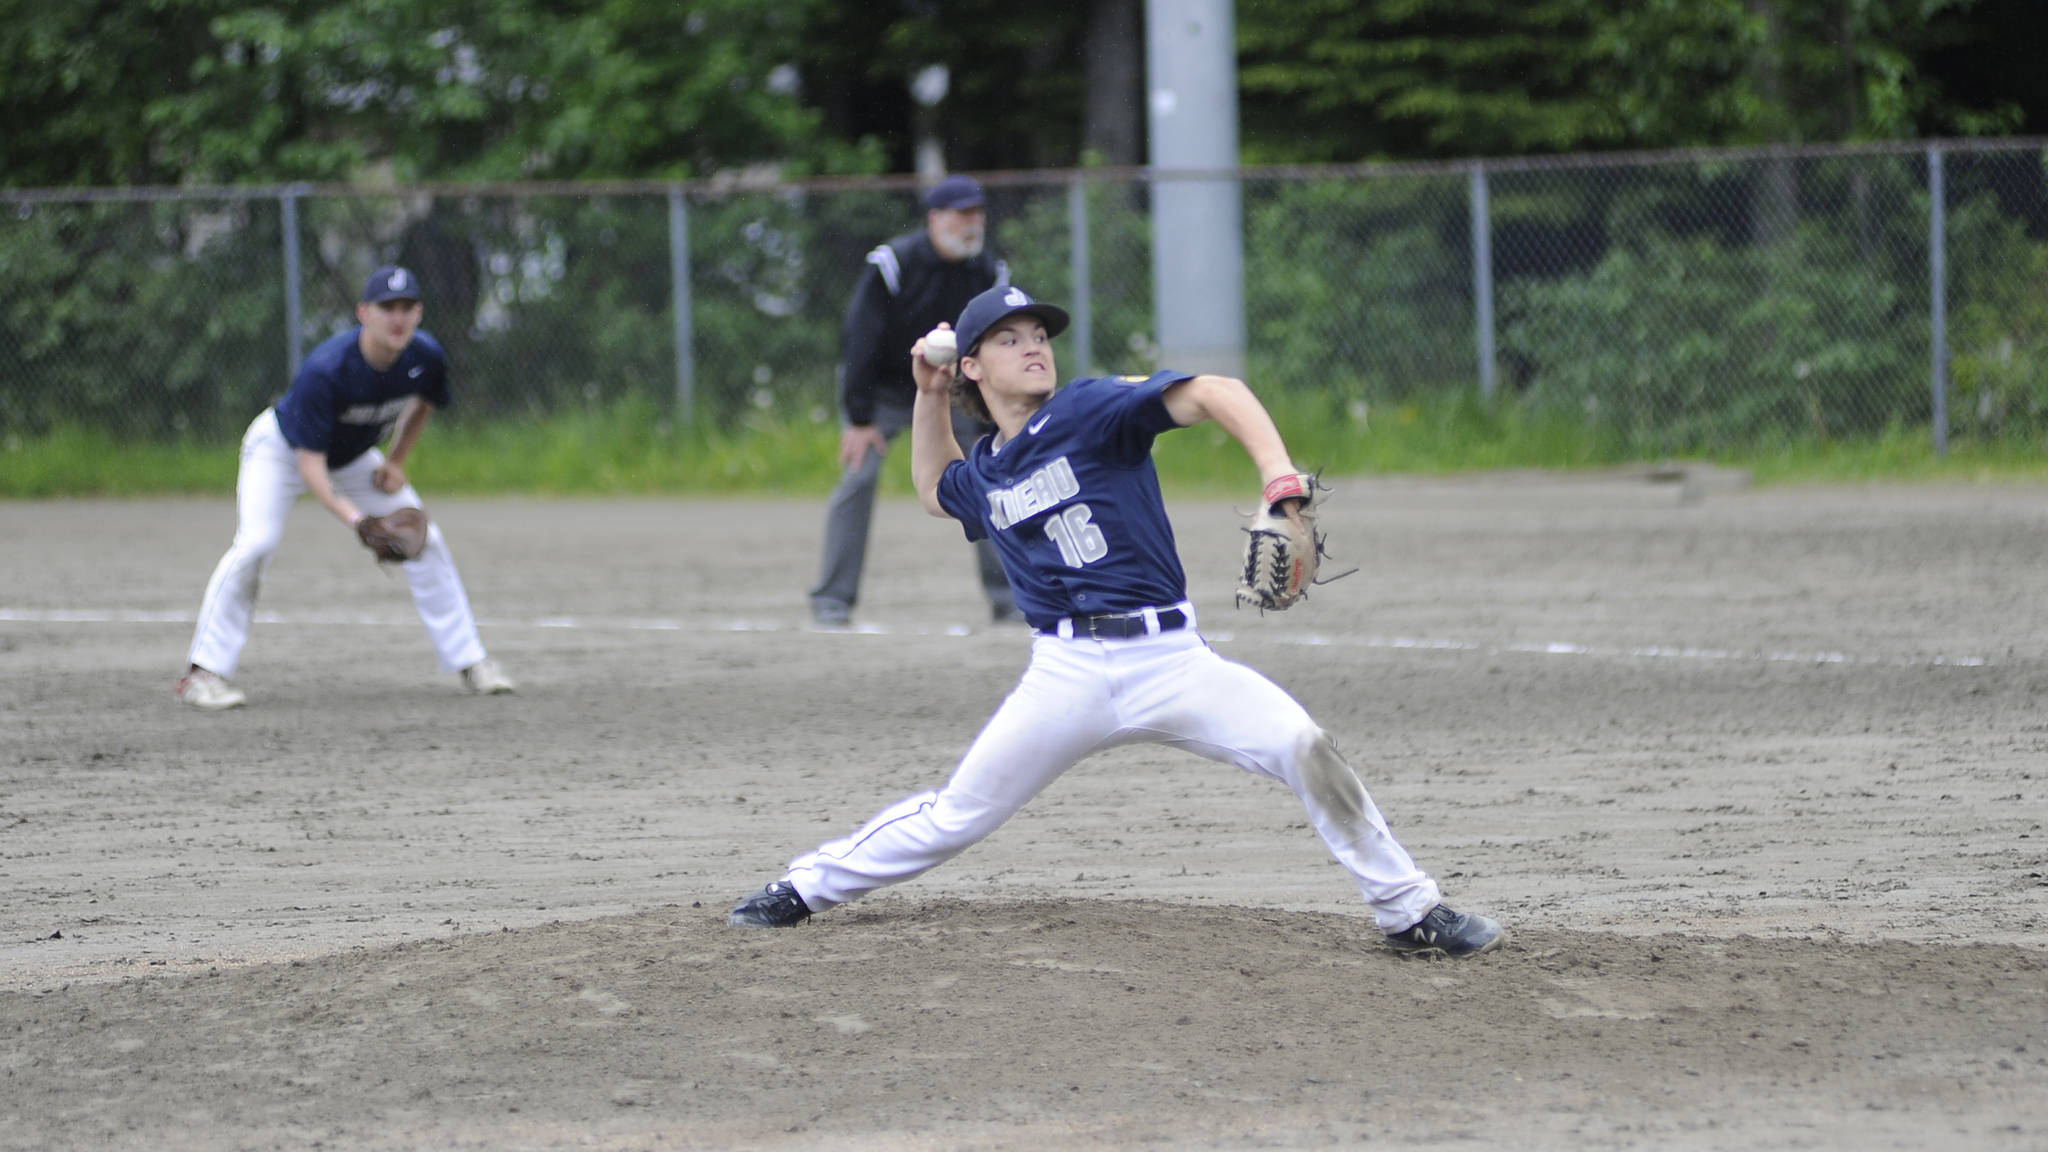 Juneau Post 25’s Donavin McCurley pitches against East Post 34 in the in the fifth inning at Adair-Kennedy Memorial Field on Saturday. (Nolin Ainsworth | Juneau Empire)